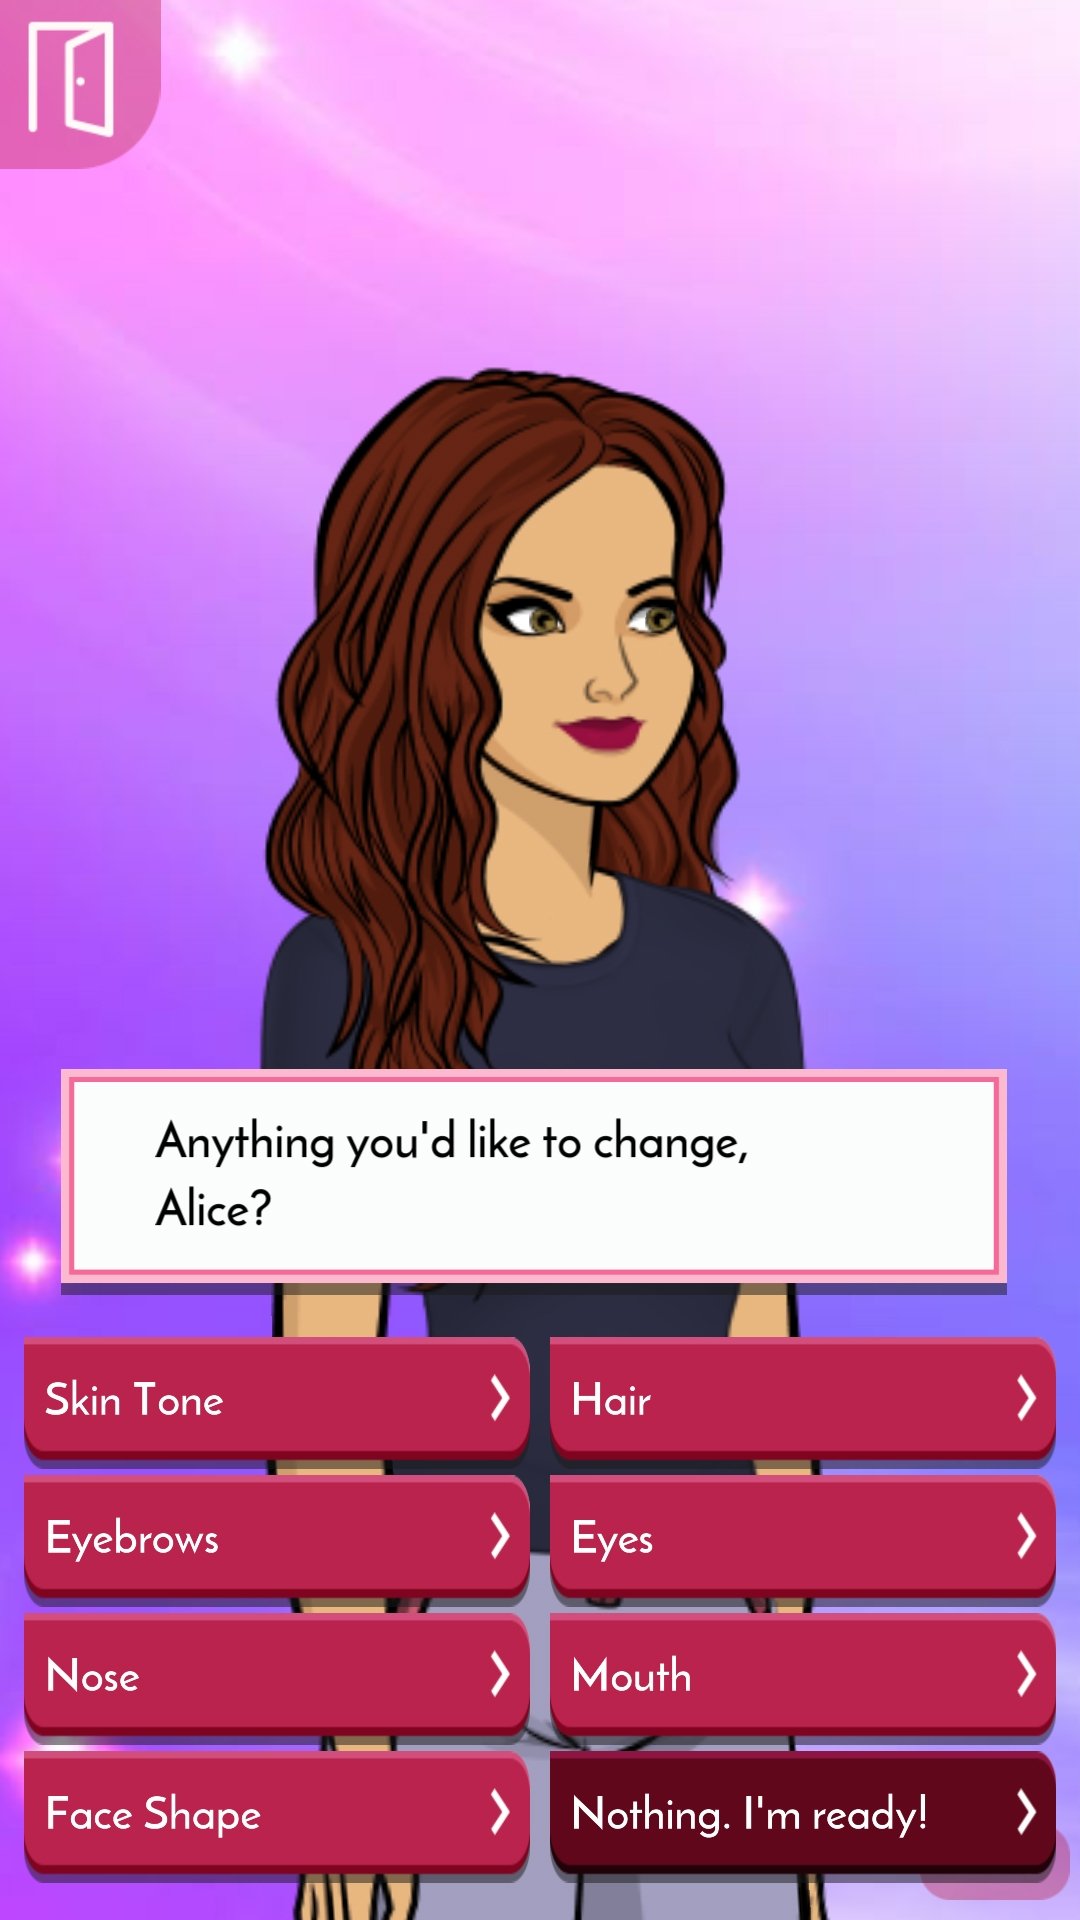 episode choose your story game download forpc